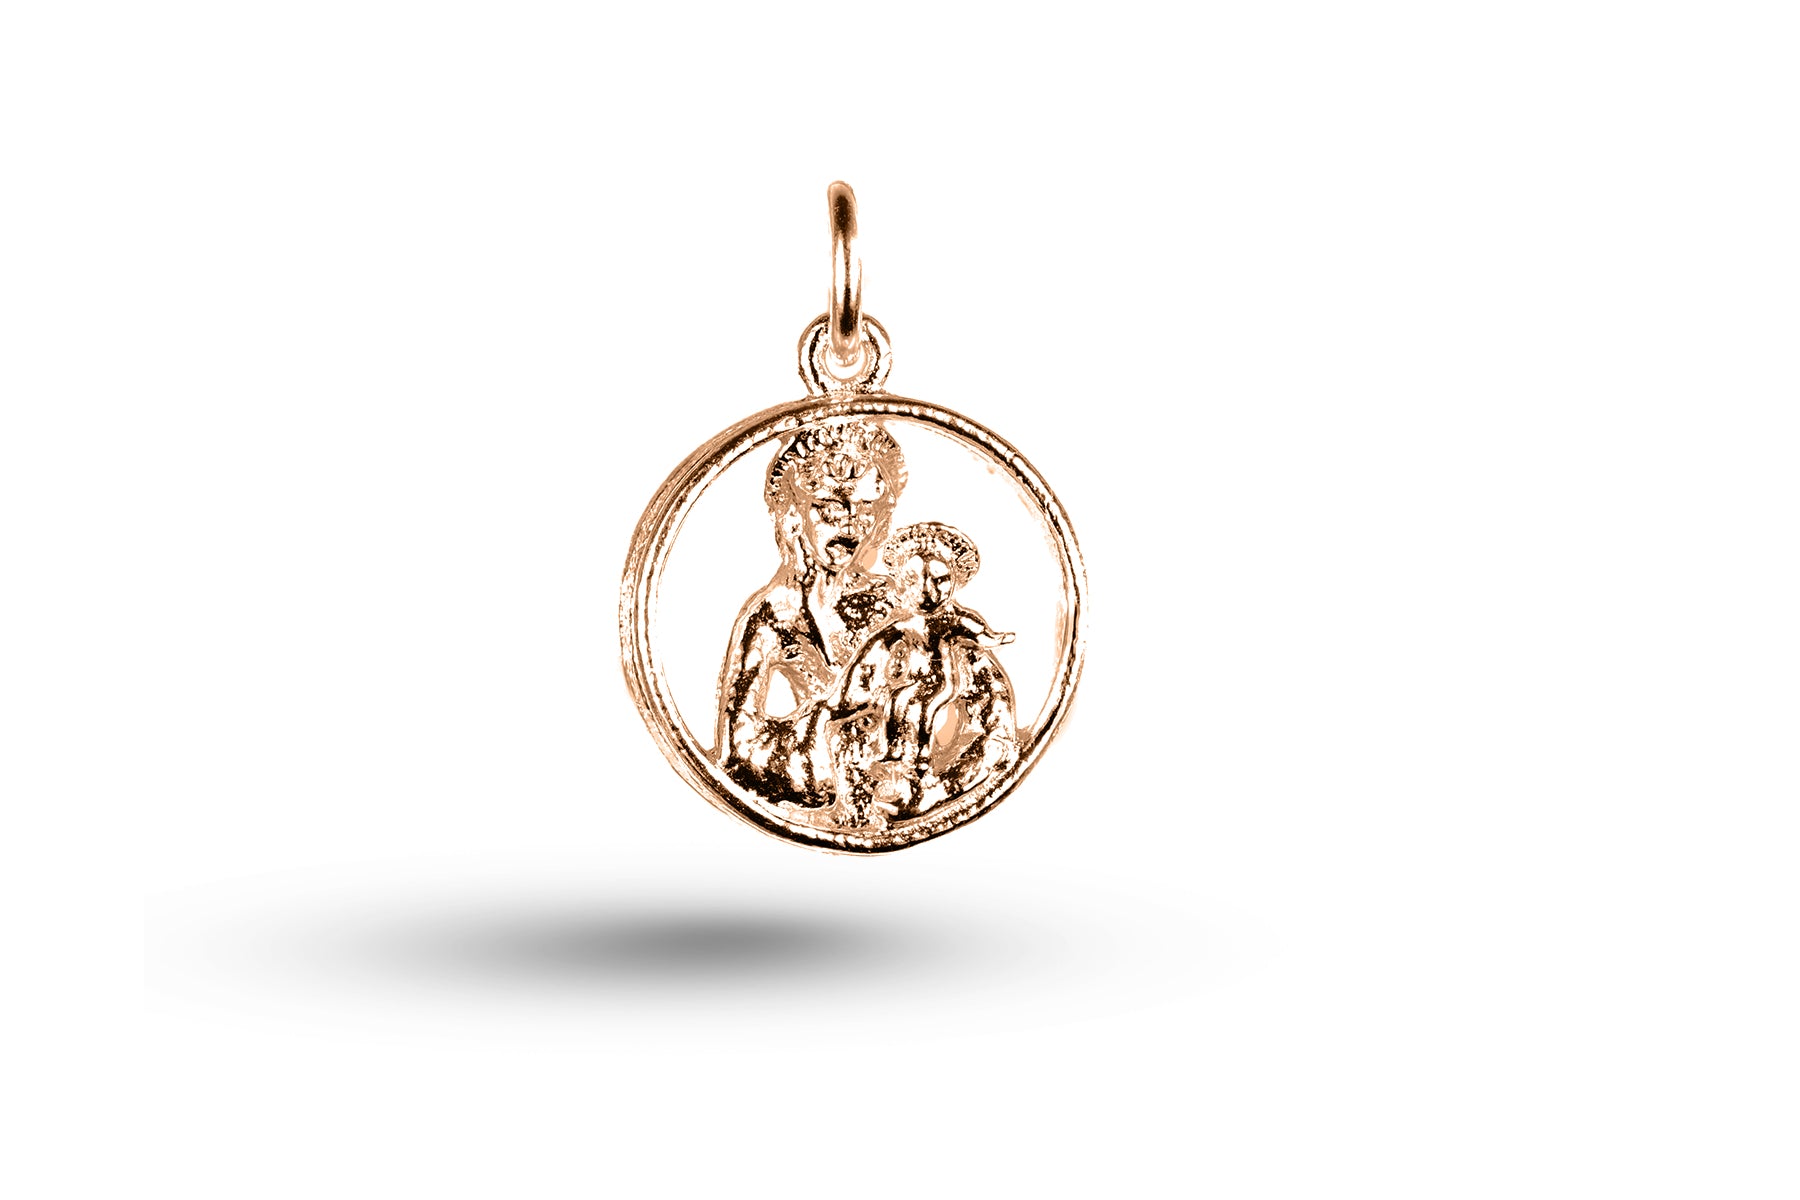 Rose gold Madonna and Child in Surround charm.